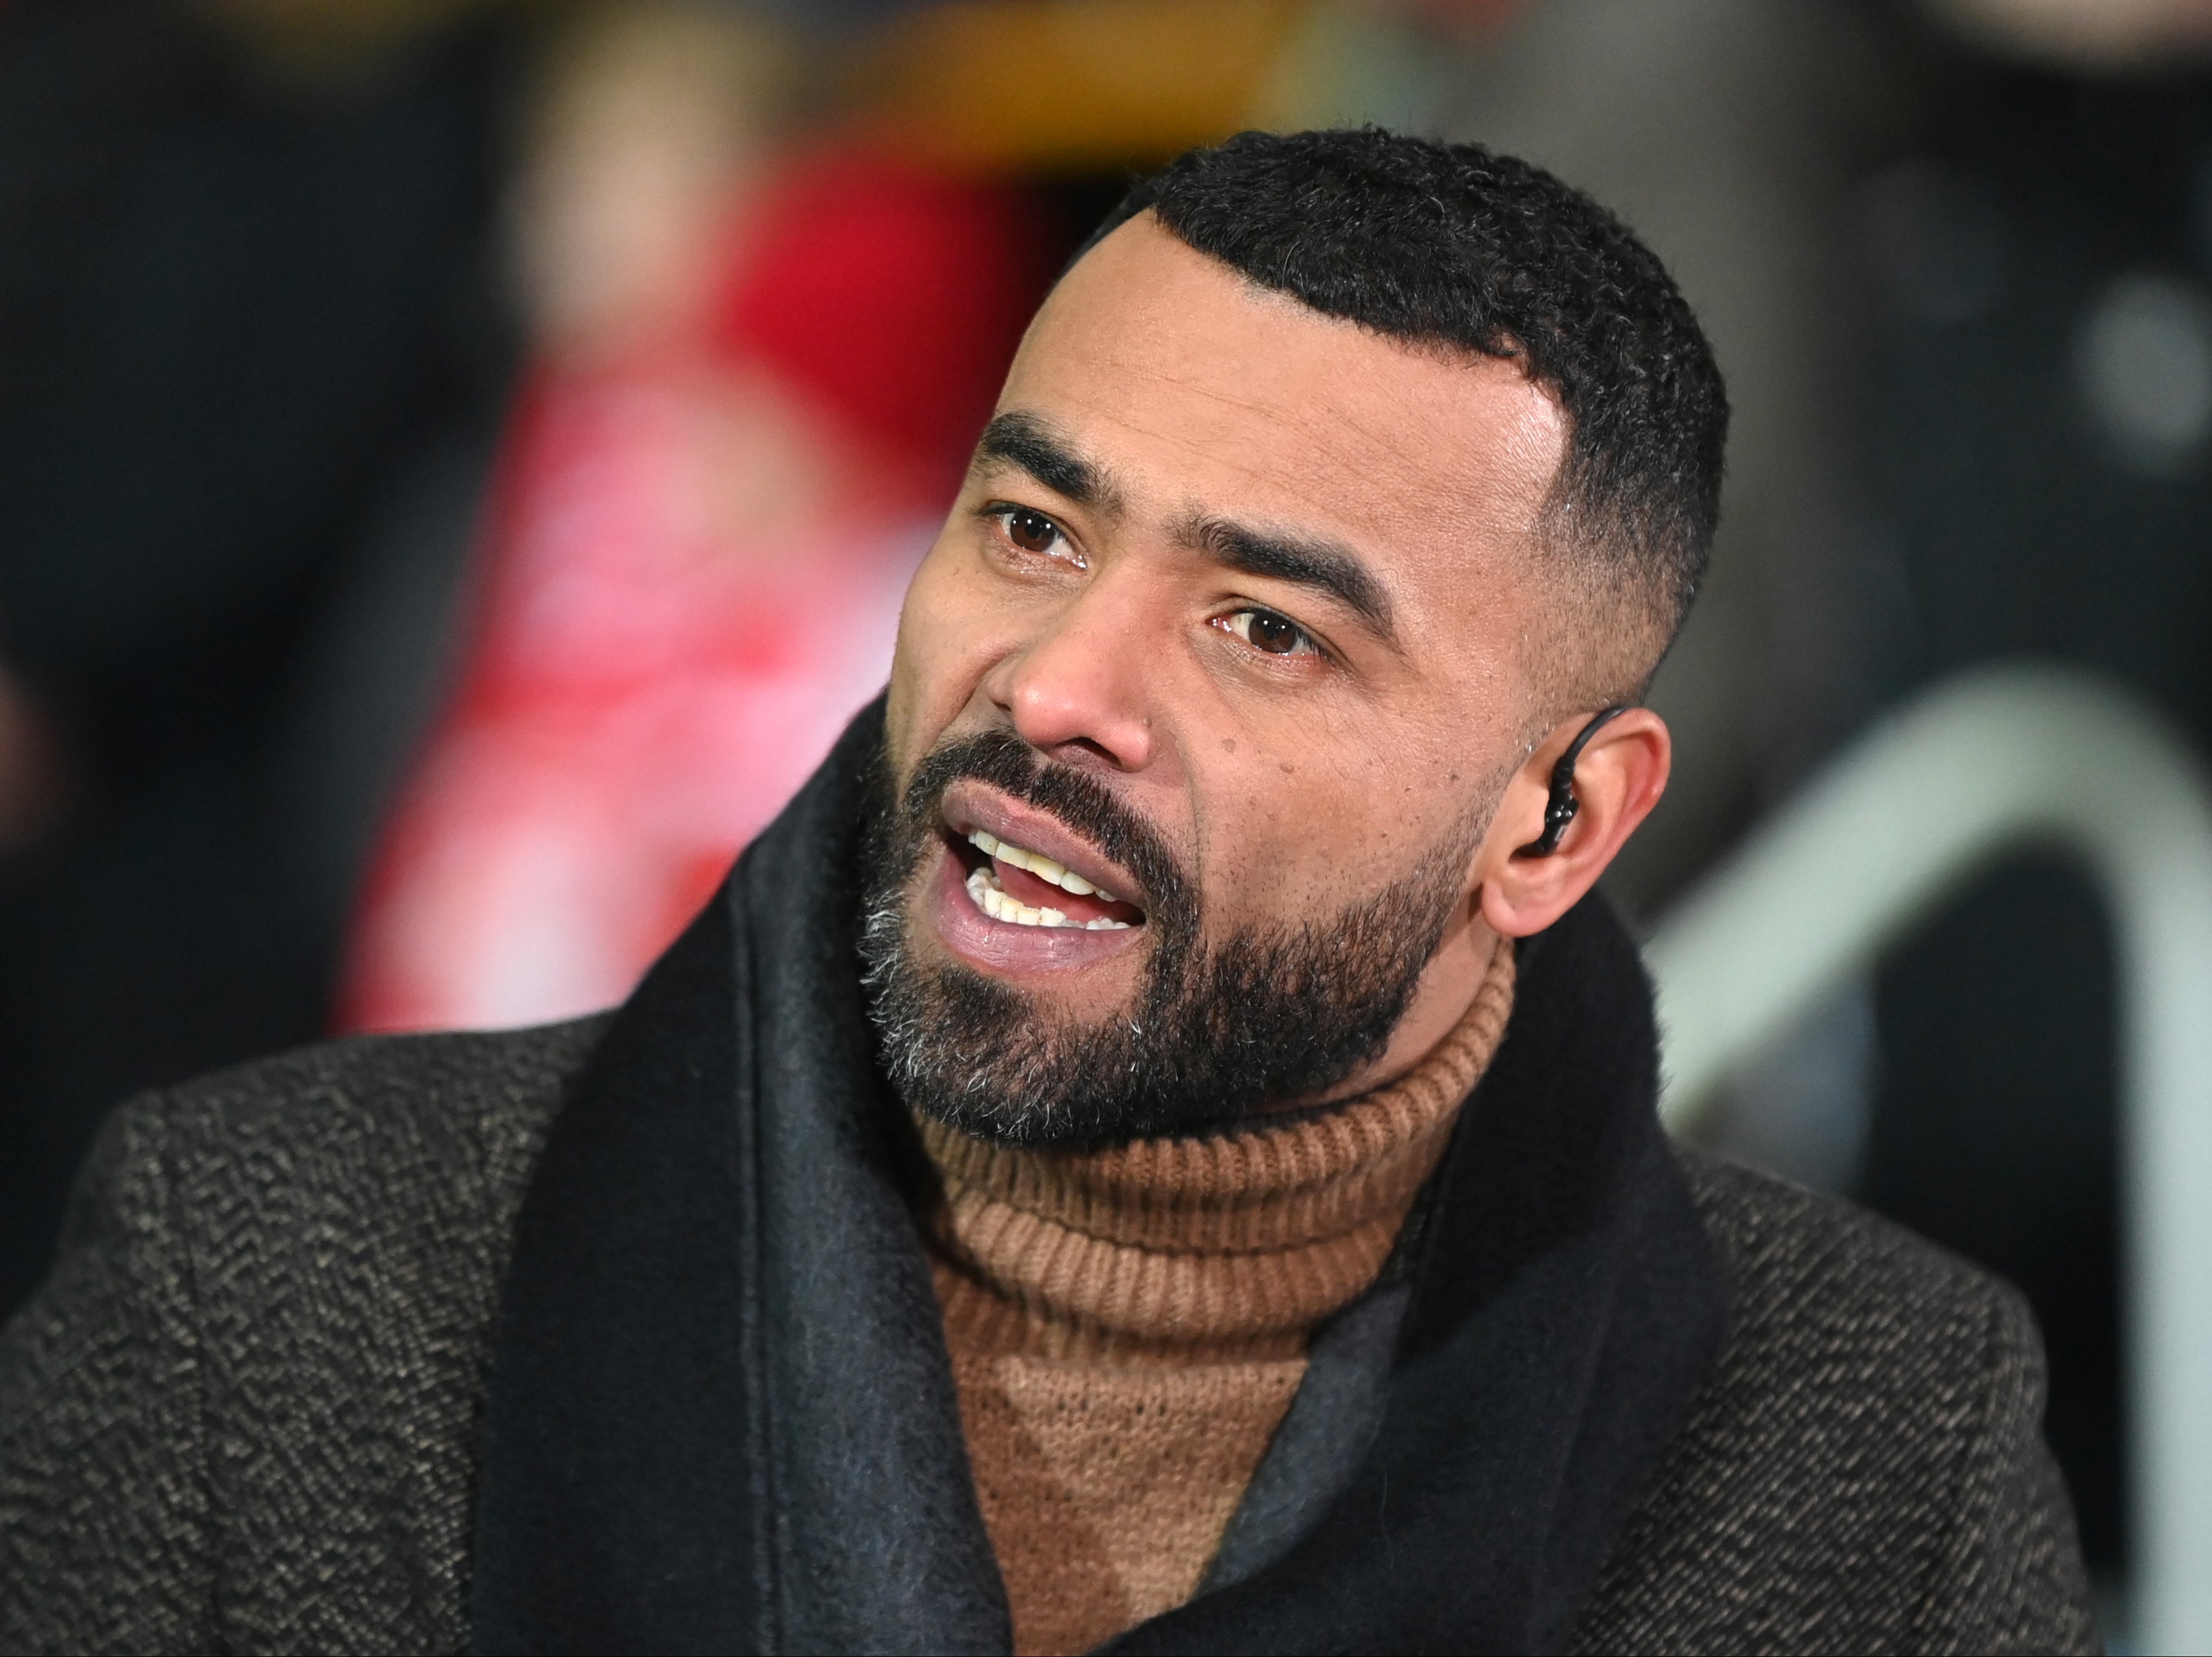 A robber broke into Ashley Cole’s home in January 2020